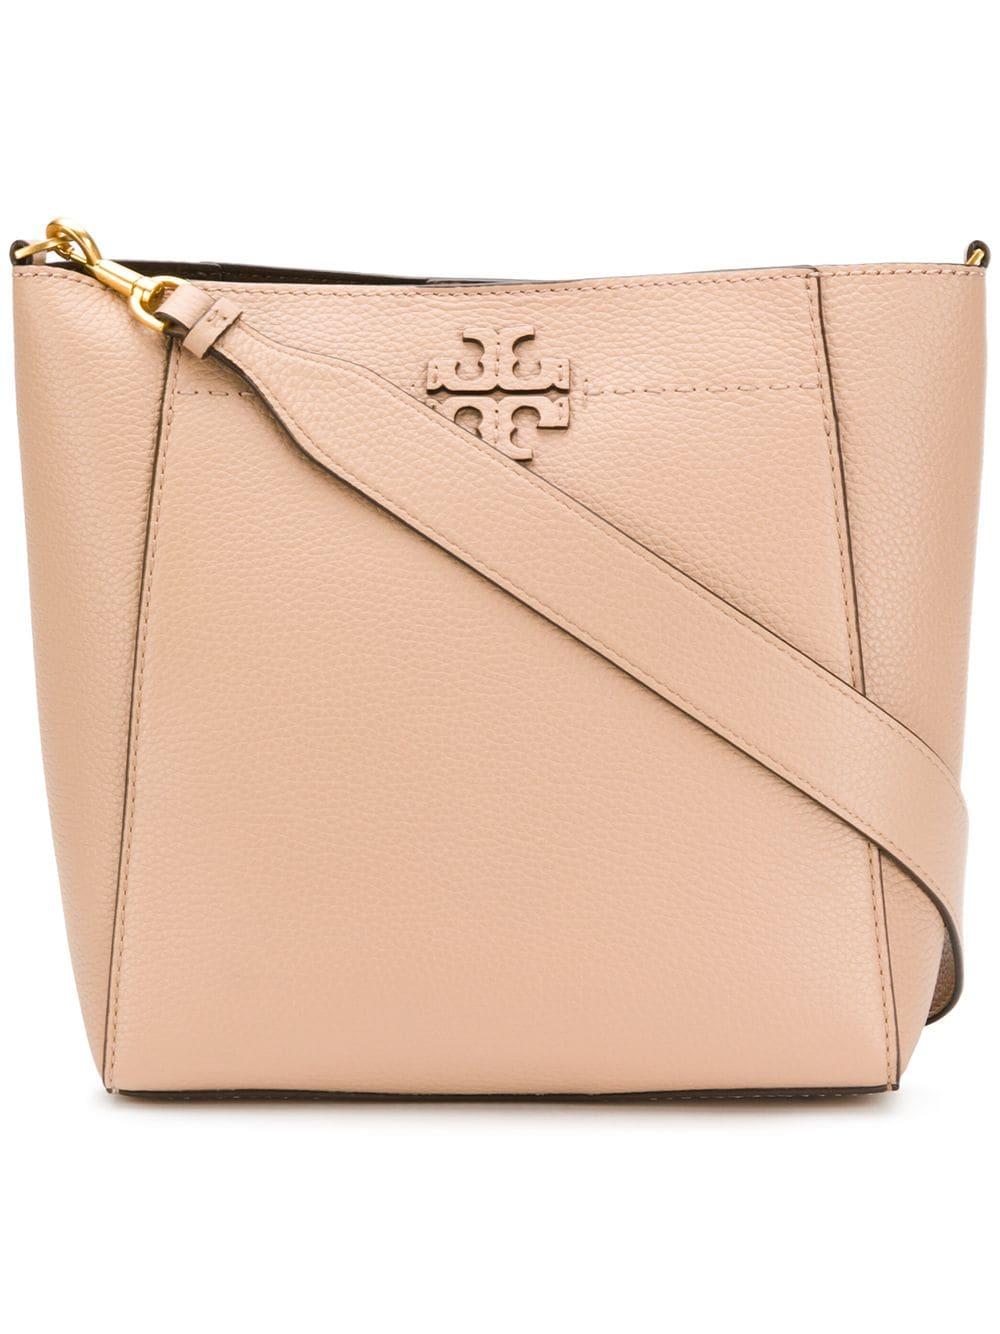 Tory Burch Mcgraw Hobo Bag in Pink | Lyst